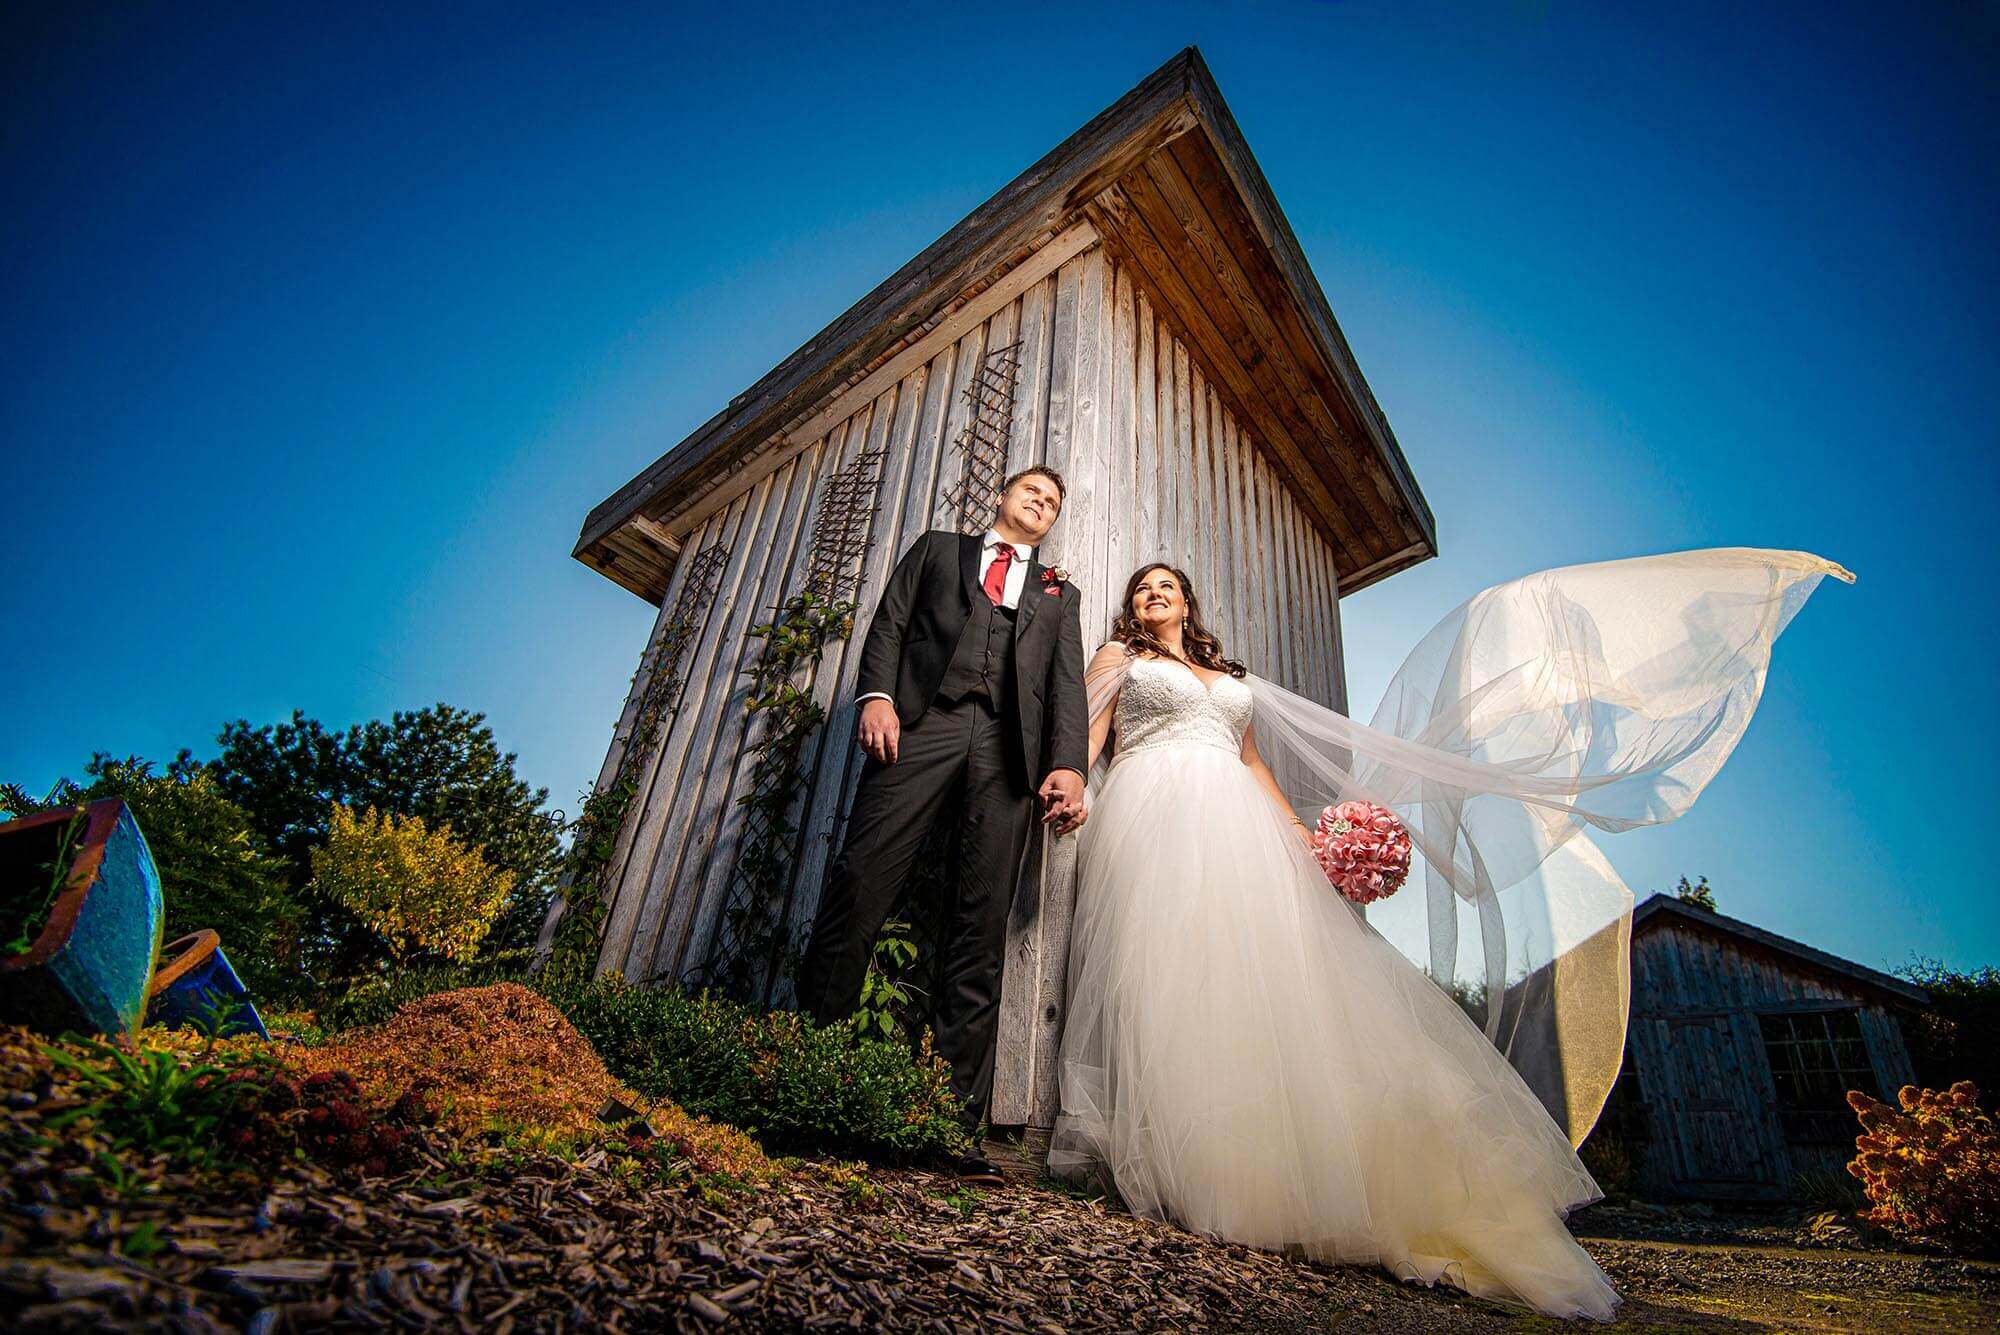 The Art of Storytelling in Wedding Photography